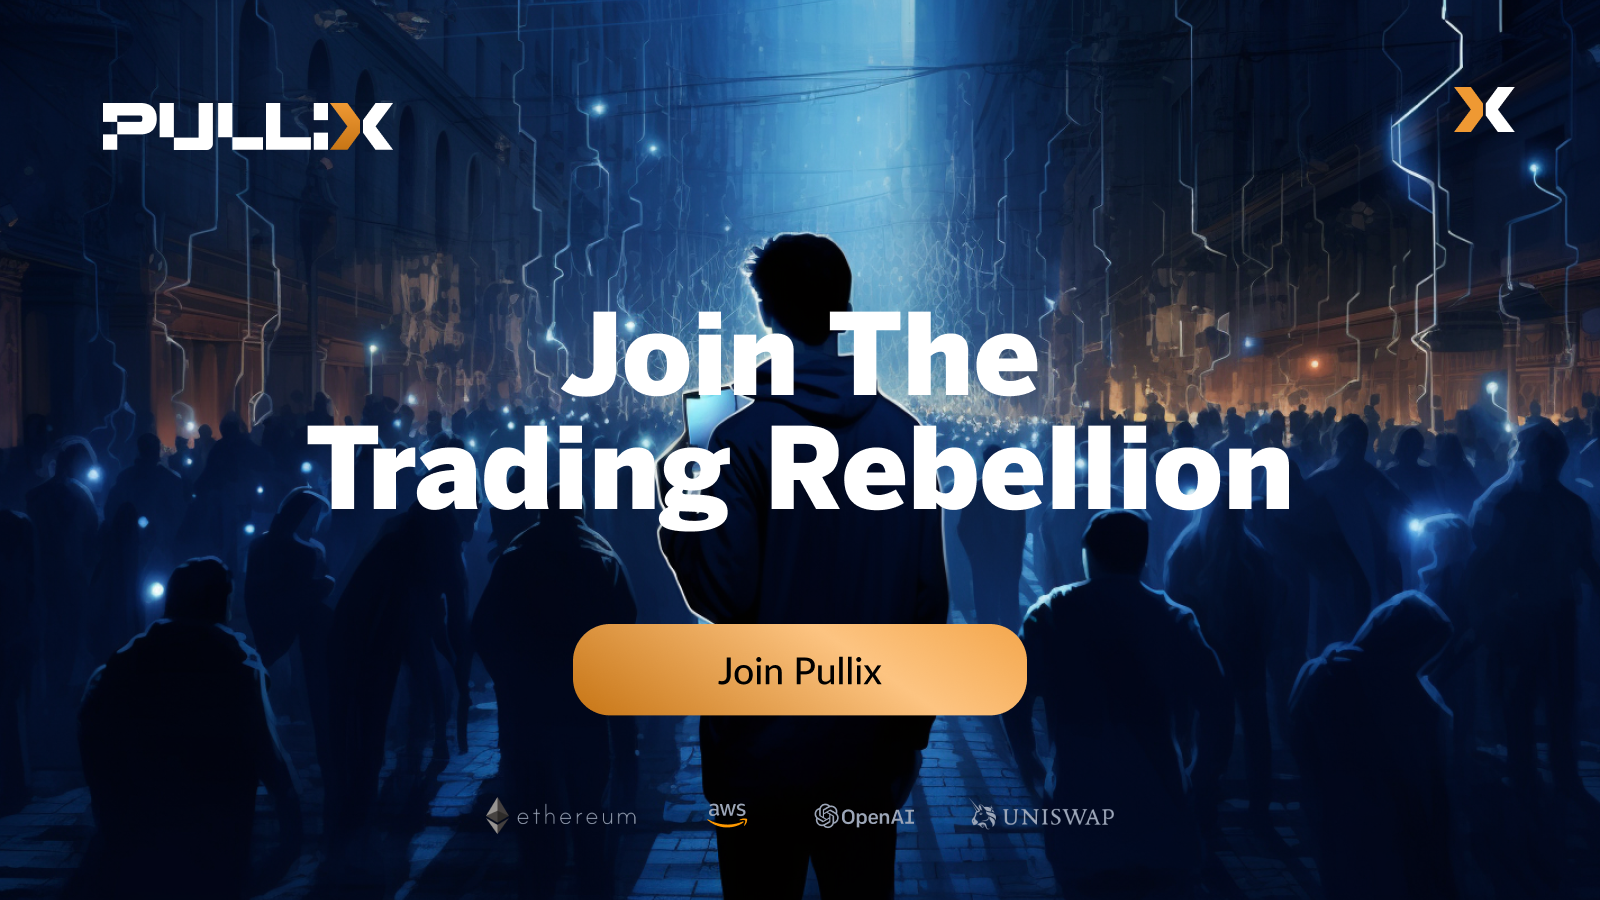 Coinbase CEO Bullish After Binance (BNB) Settlement – Traders Turn to Tron (TRX) and Pullix (PLX) for Gains